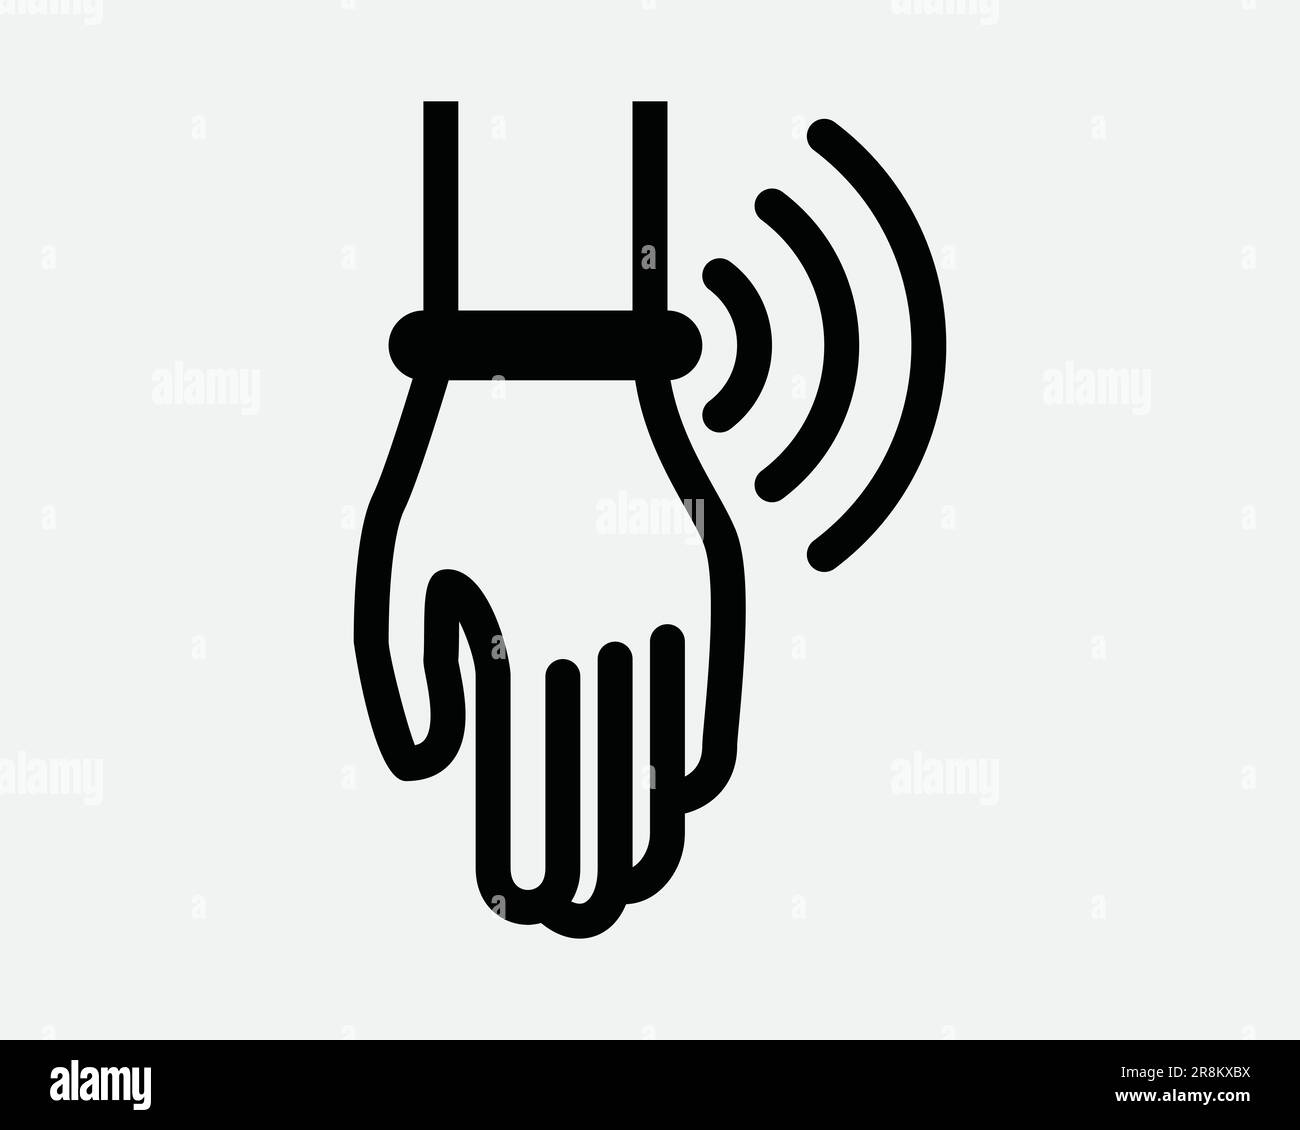 Wearable Technology Icon. Smart Watch Band Wireless Signal Connection Network Black White Sign Symbol Illustration Artwork Graphic Clipart EPS Vector Stock Vector